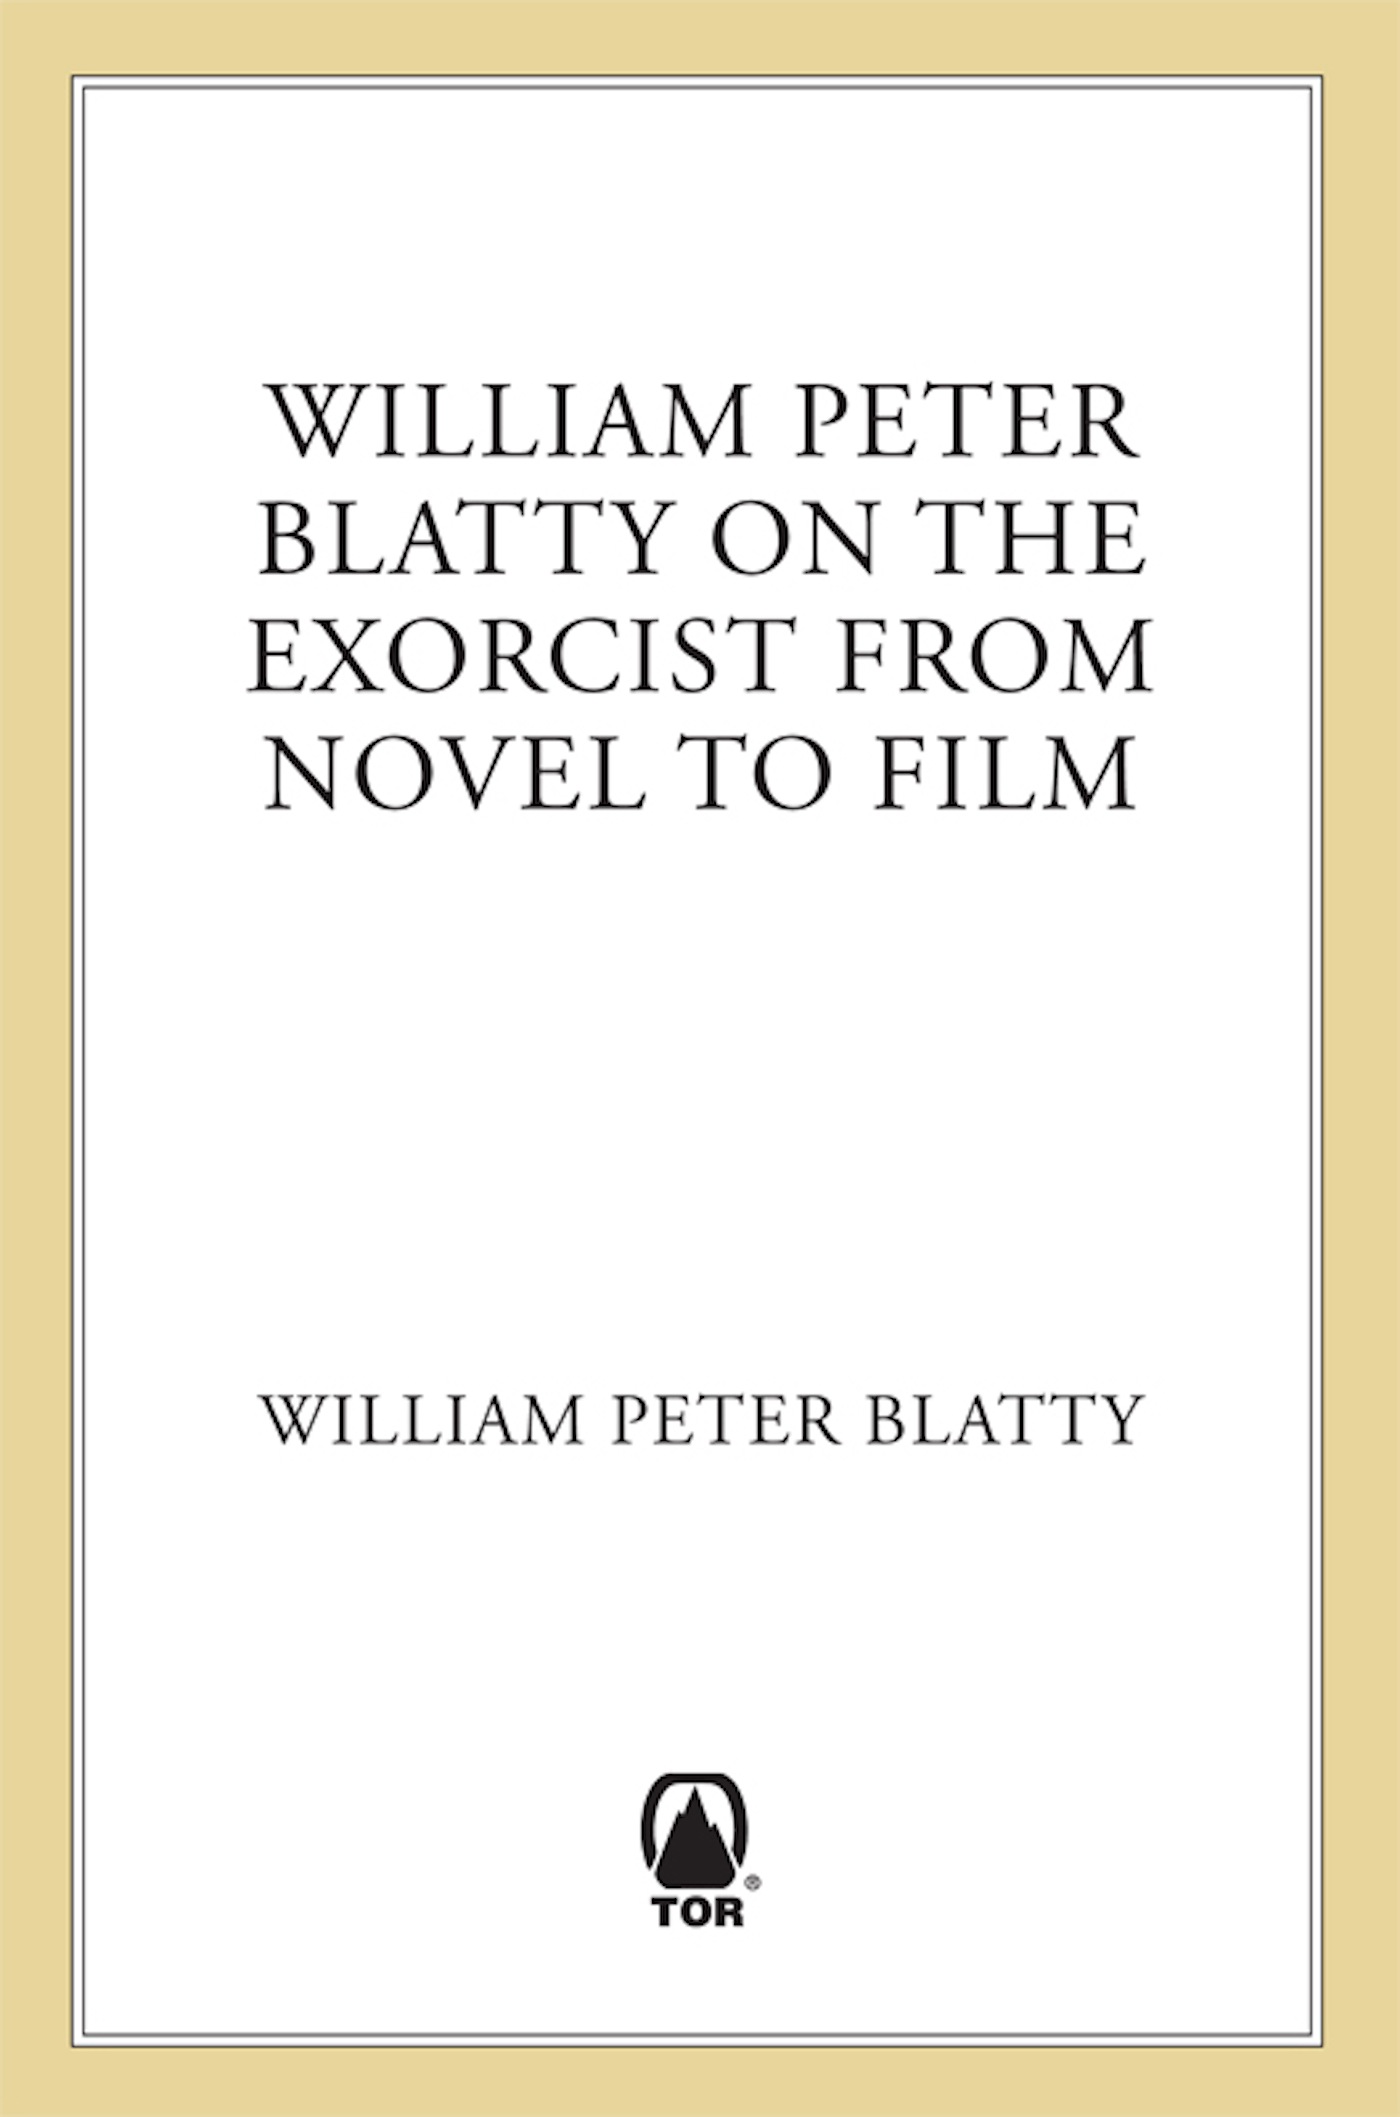 William Peter Blatty on "The Exorcist" : From Novel to Screen by William Peter Blatty